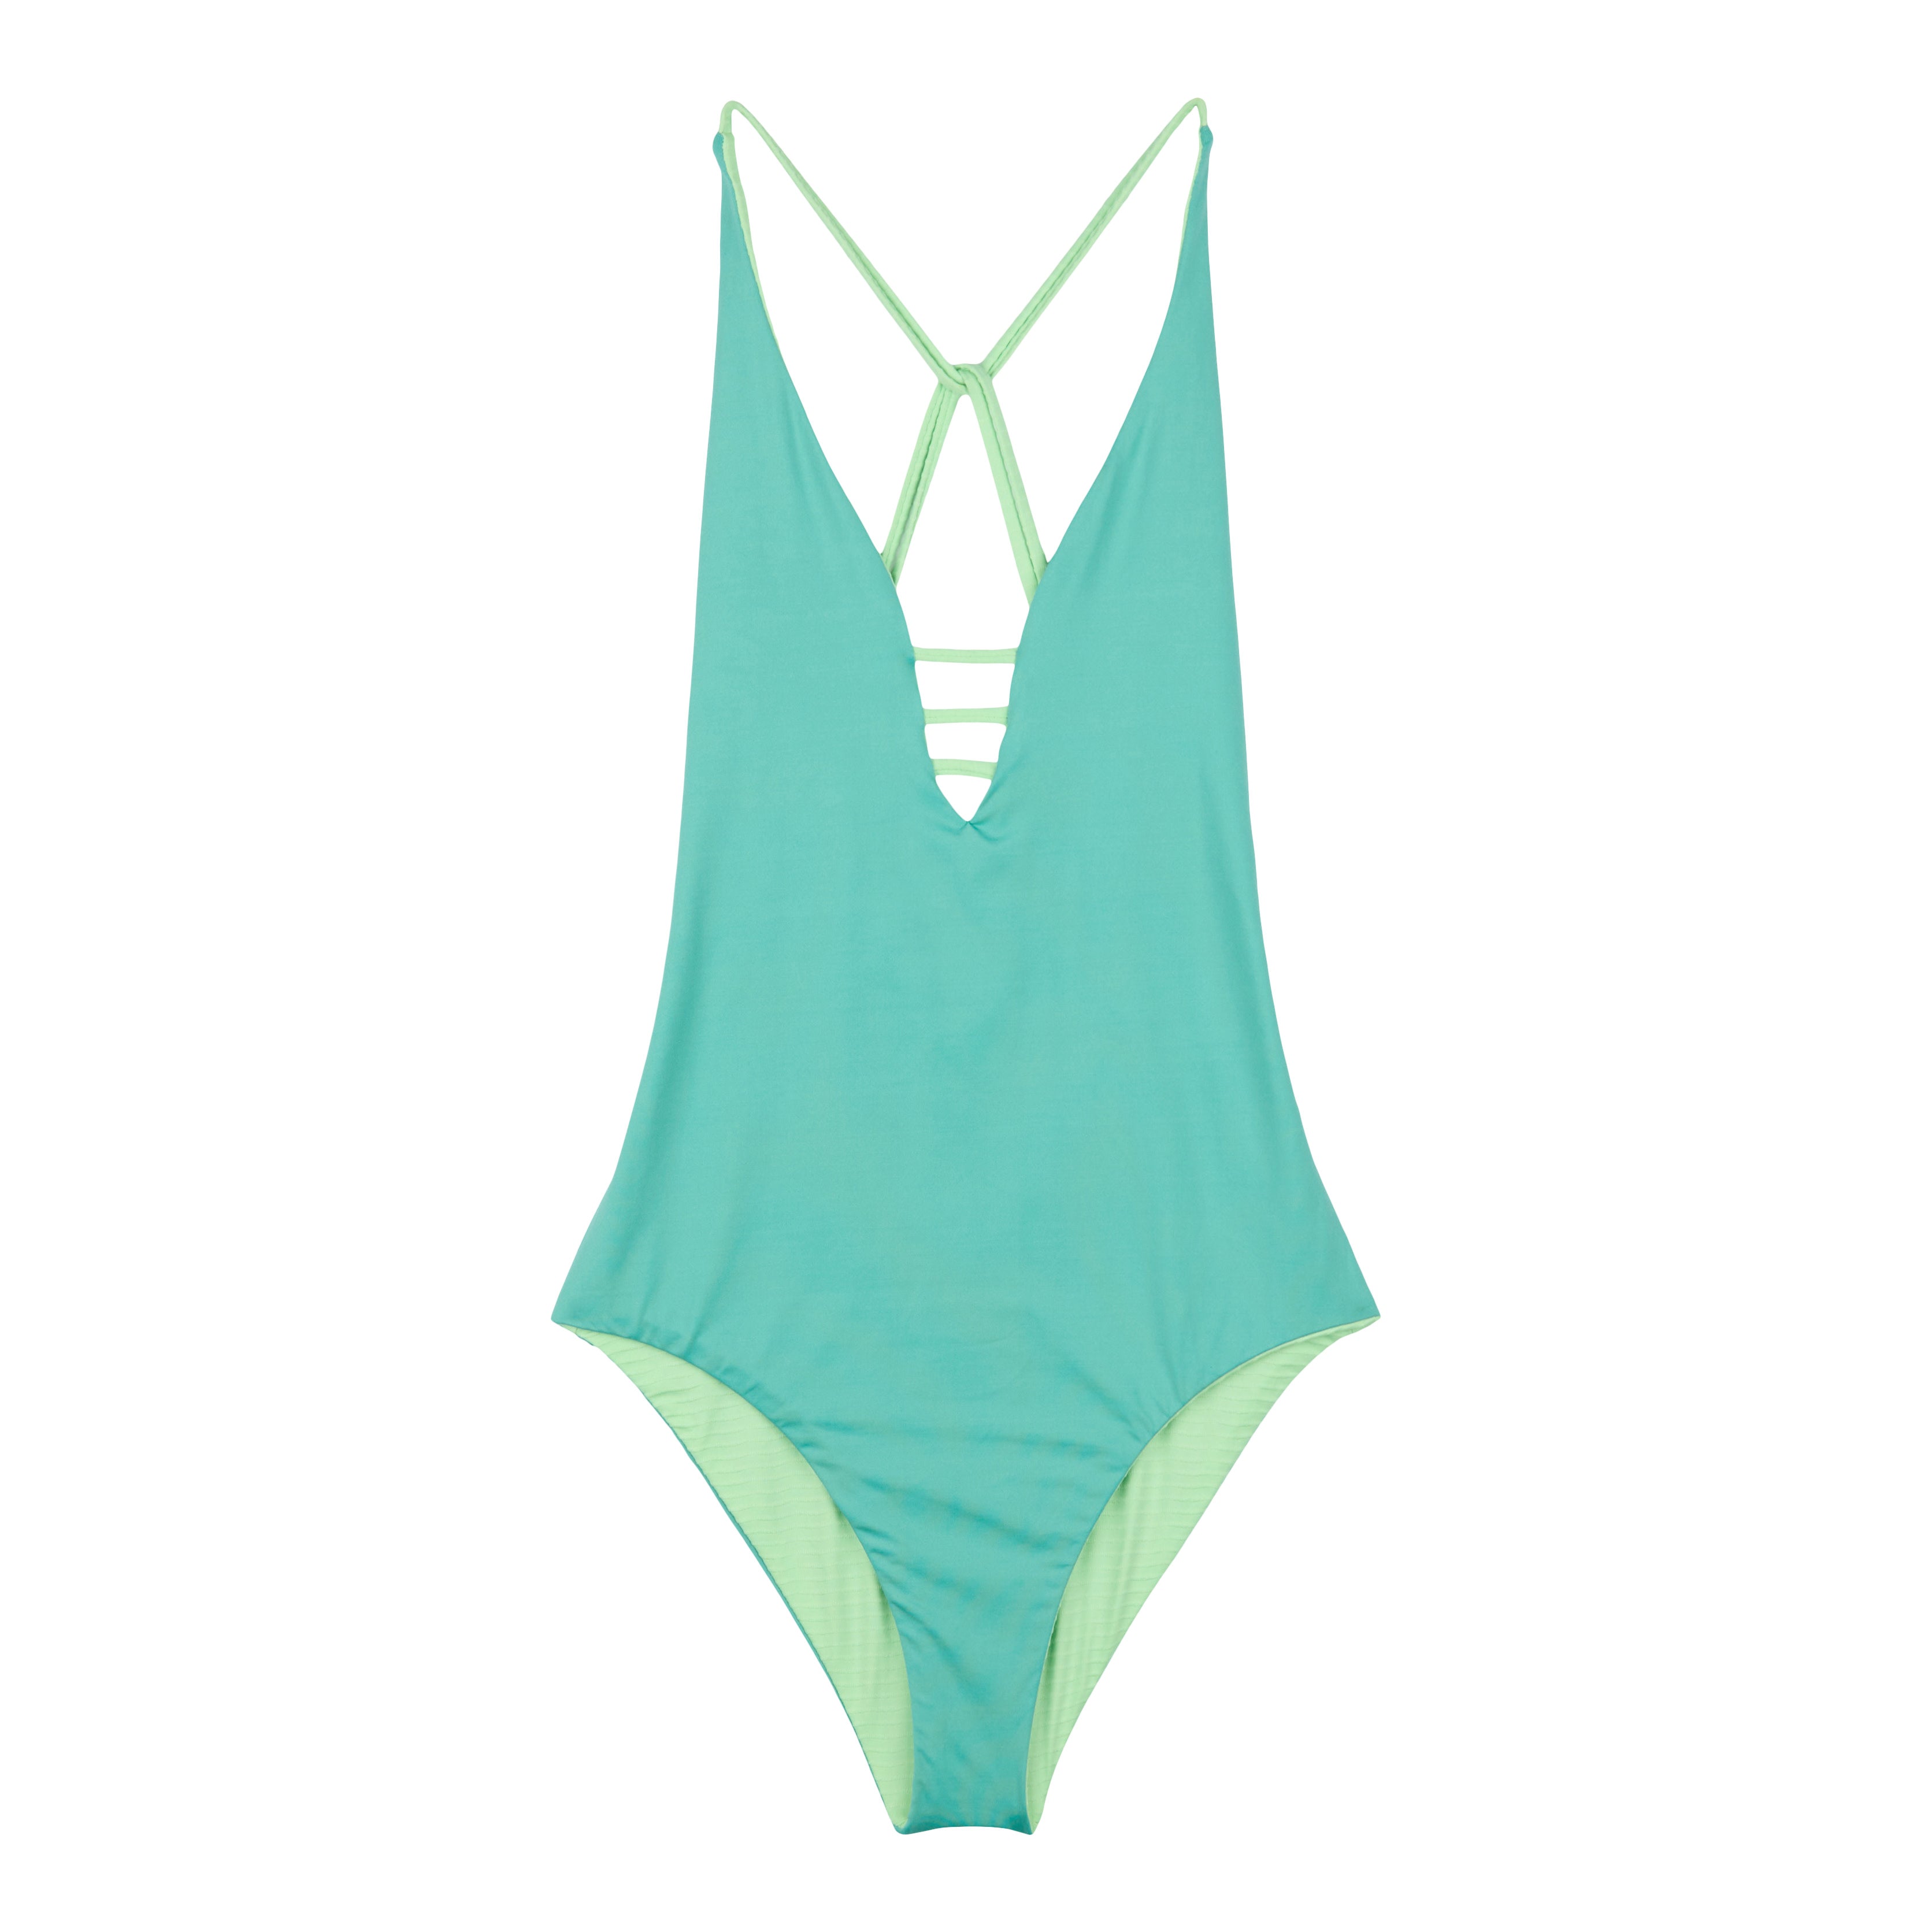 Dive In Retro One Piece Swimsuit by Banned Clothing - SALE Size S only